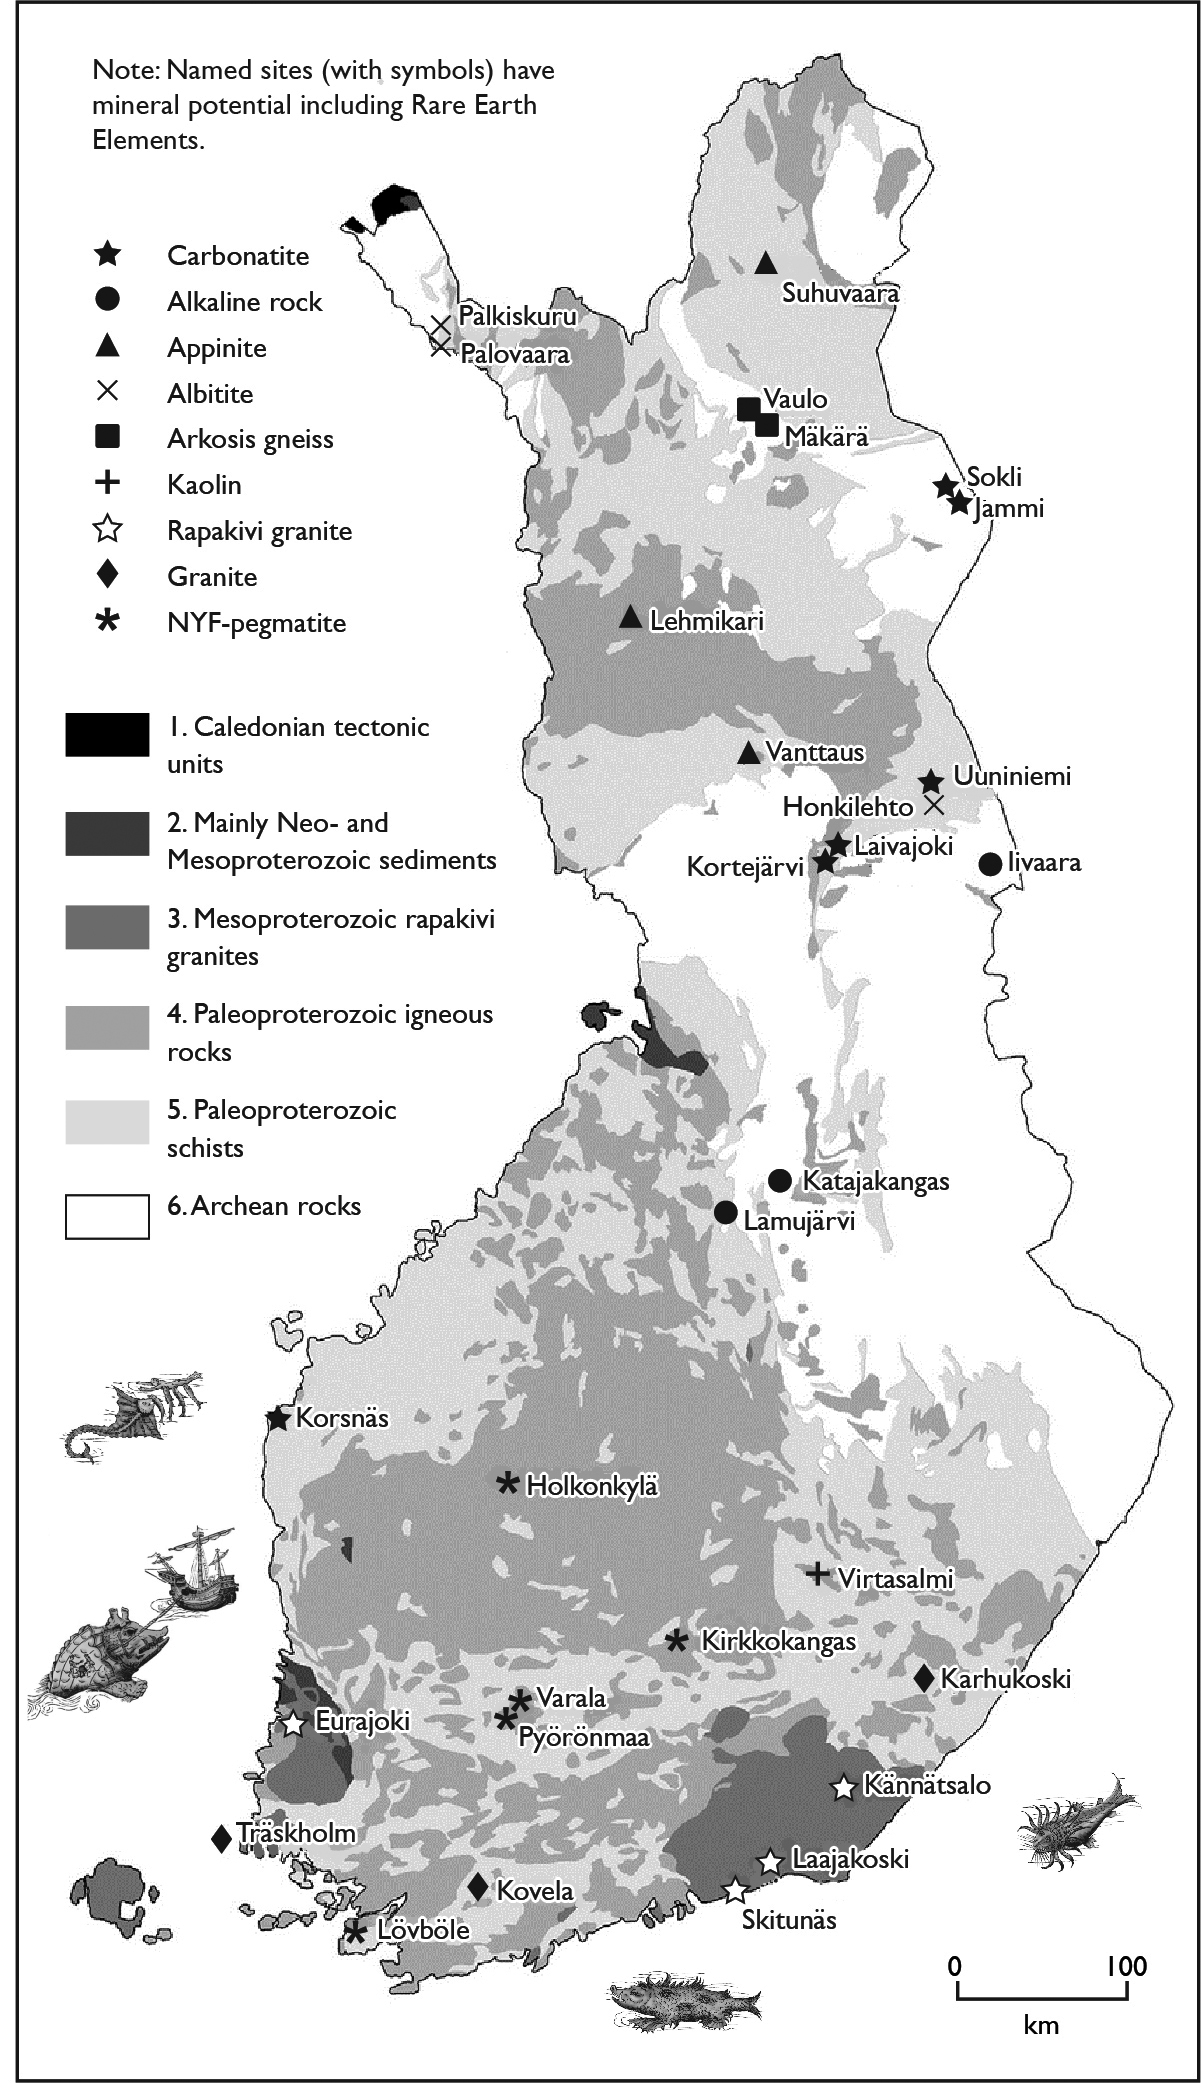 Figure 1.3 (Part II): Sources: Geological timeline redrawn from an original in Nenonen, J. and Portaankorva, A. (2009) The geology of the lakeland Finland area, Helsinki: Geological Survey of Finland, https://www.uef.fi/documents/640649/725289/georeview+finland.pdf Map redrawn from an original that was first published in Sarapää, O., Al Ani, T., Lahti, S., Lauri, L., Sarala, P., Torppa, A., and Kontinen, A. (2013) Rare earth exploration potential in Finland, The Journal of Geochemical Exploration 133, pp.25–41, October 2013.